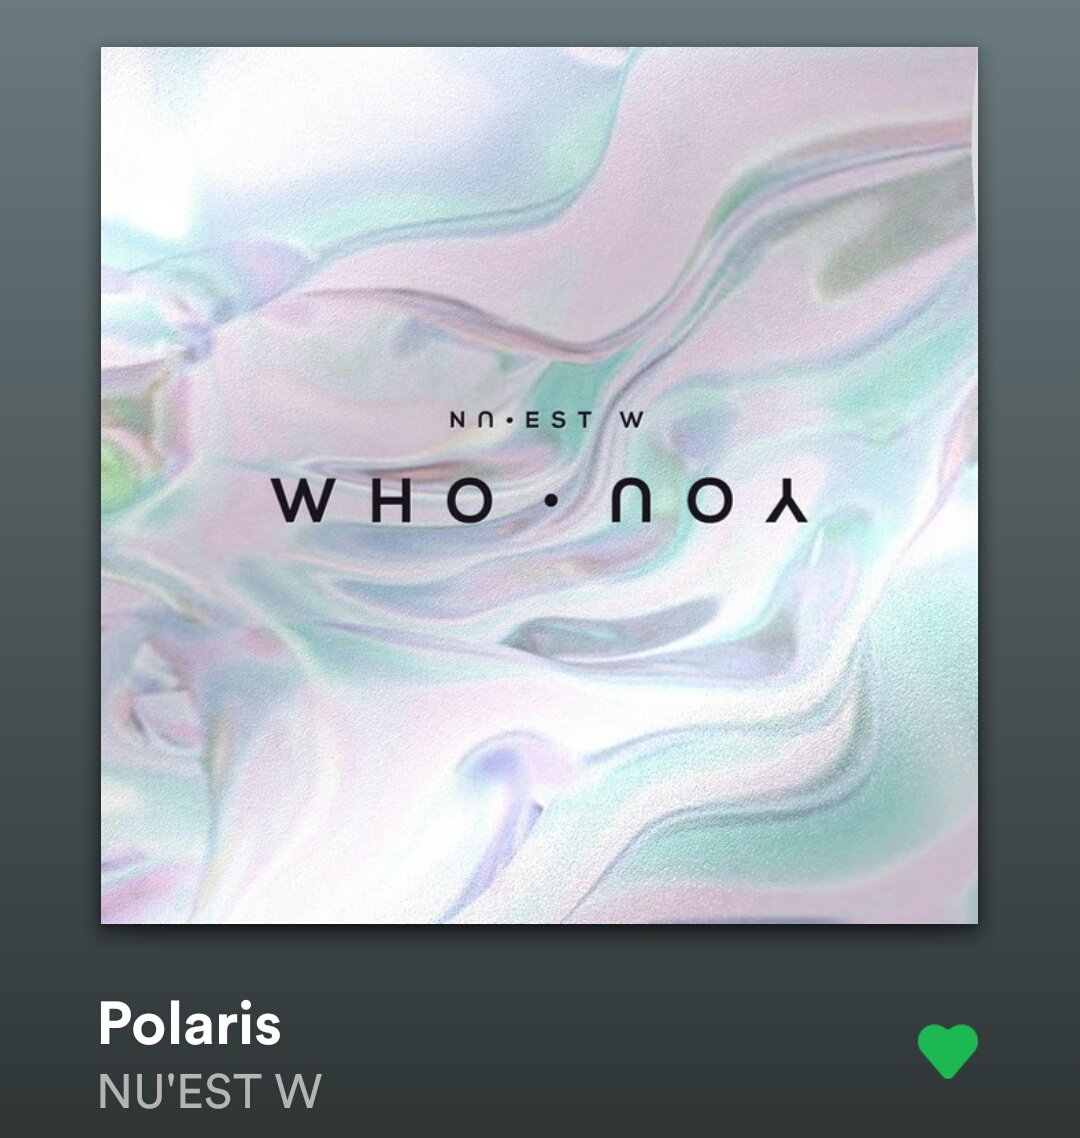 if your favorite song is polaris: you love to write poetry and take things into a deeper meaning